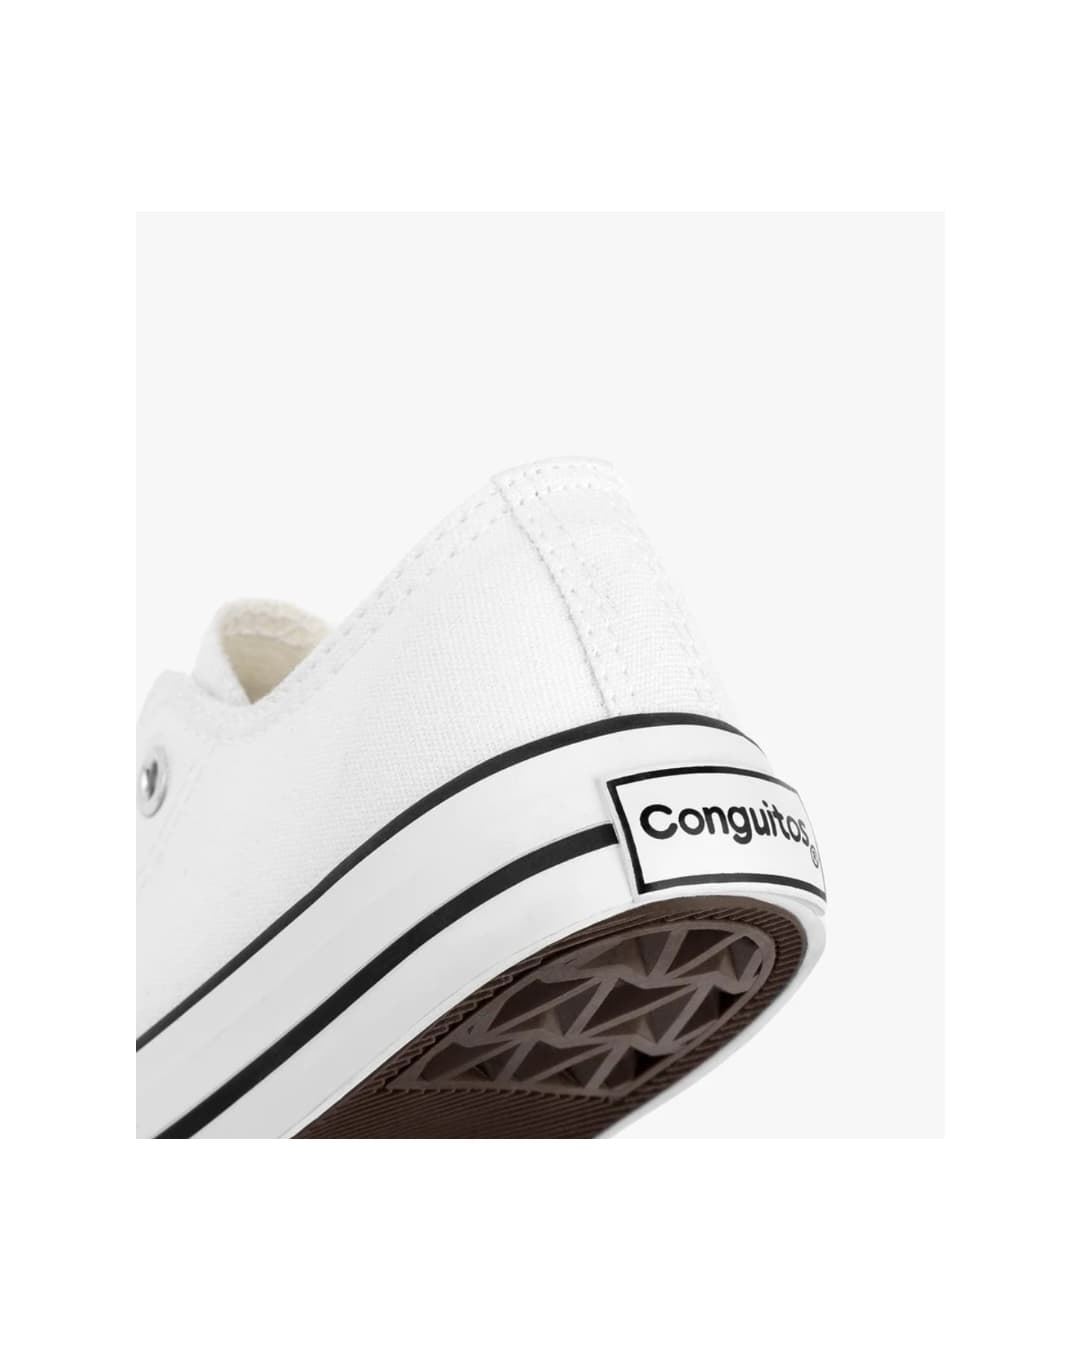 Conguitos Classic Canvas Sneakers White Kids - Image 3